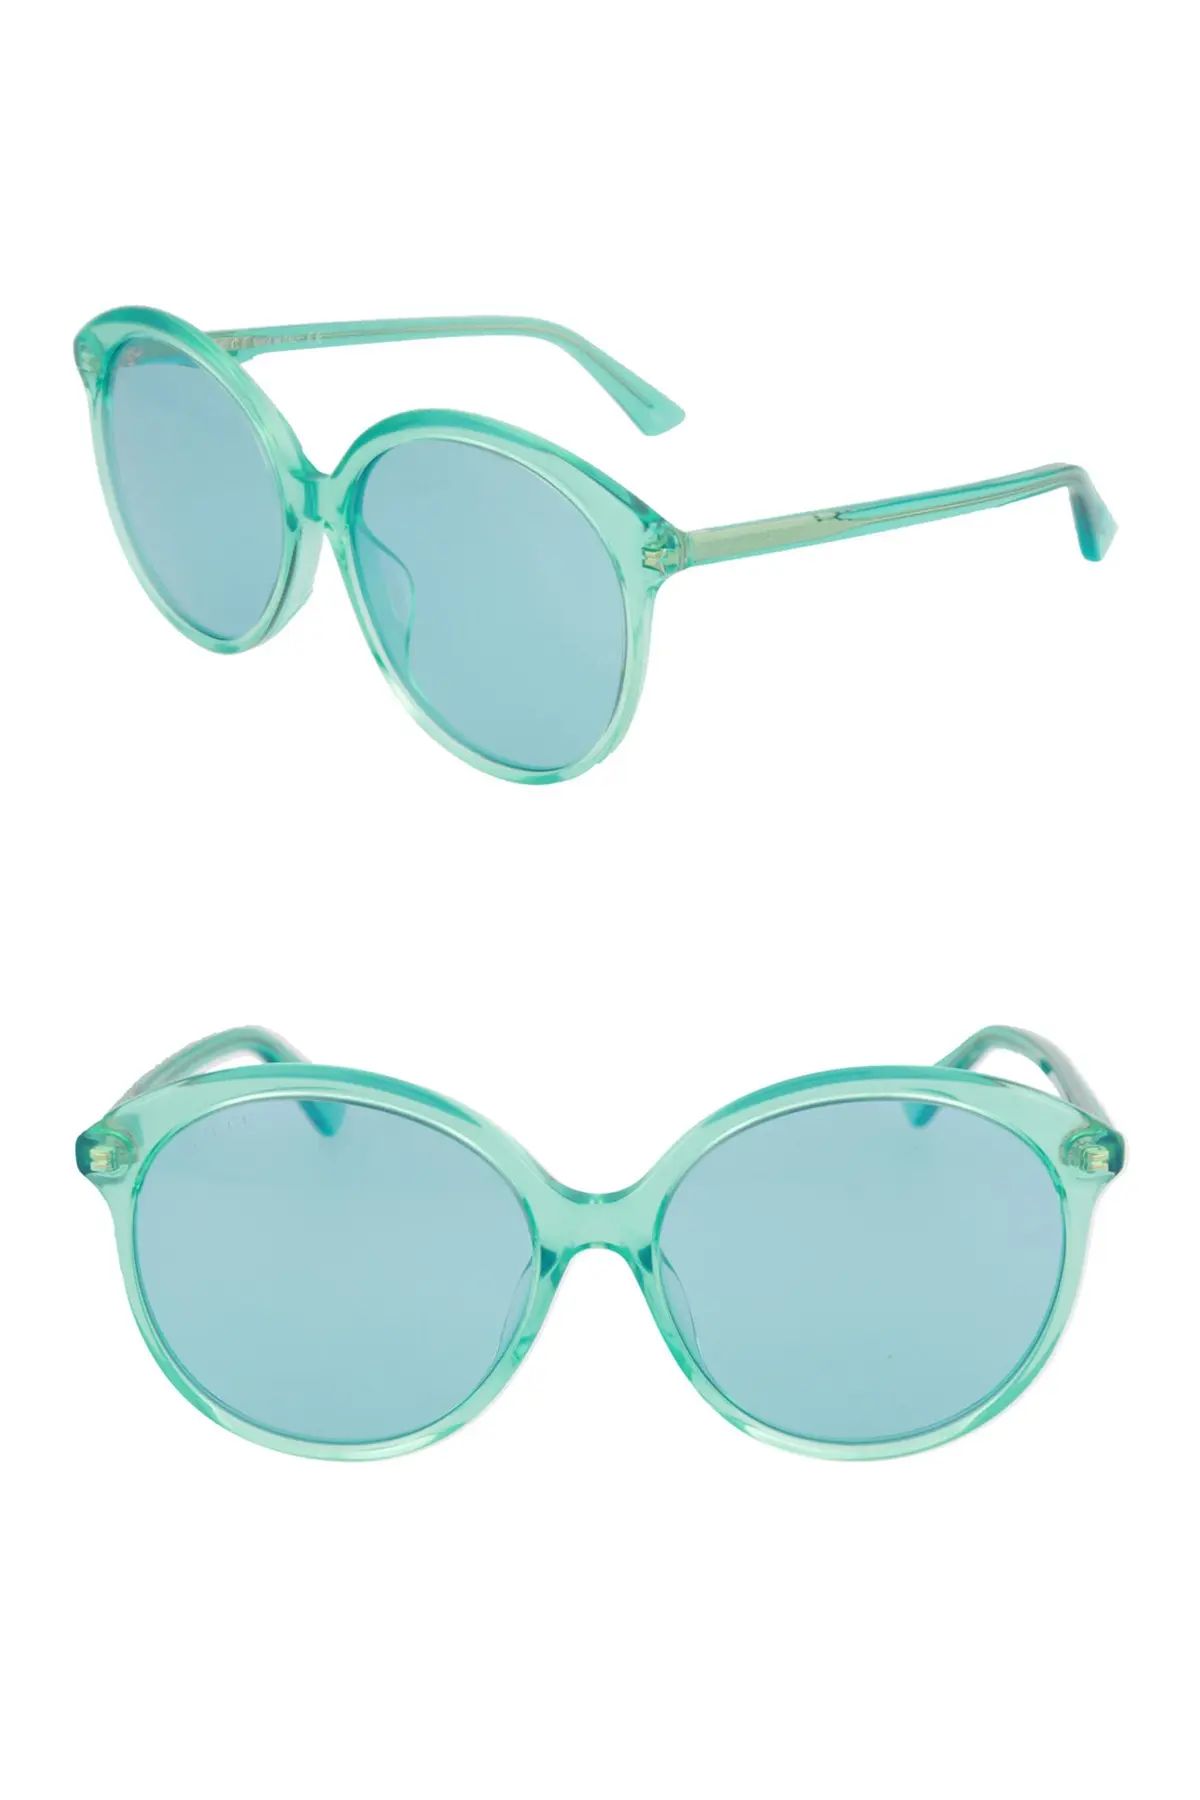 GUCCI Core 59mm Round Sunglasses at Nordstrom Rack | Hautelook